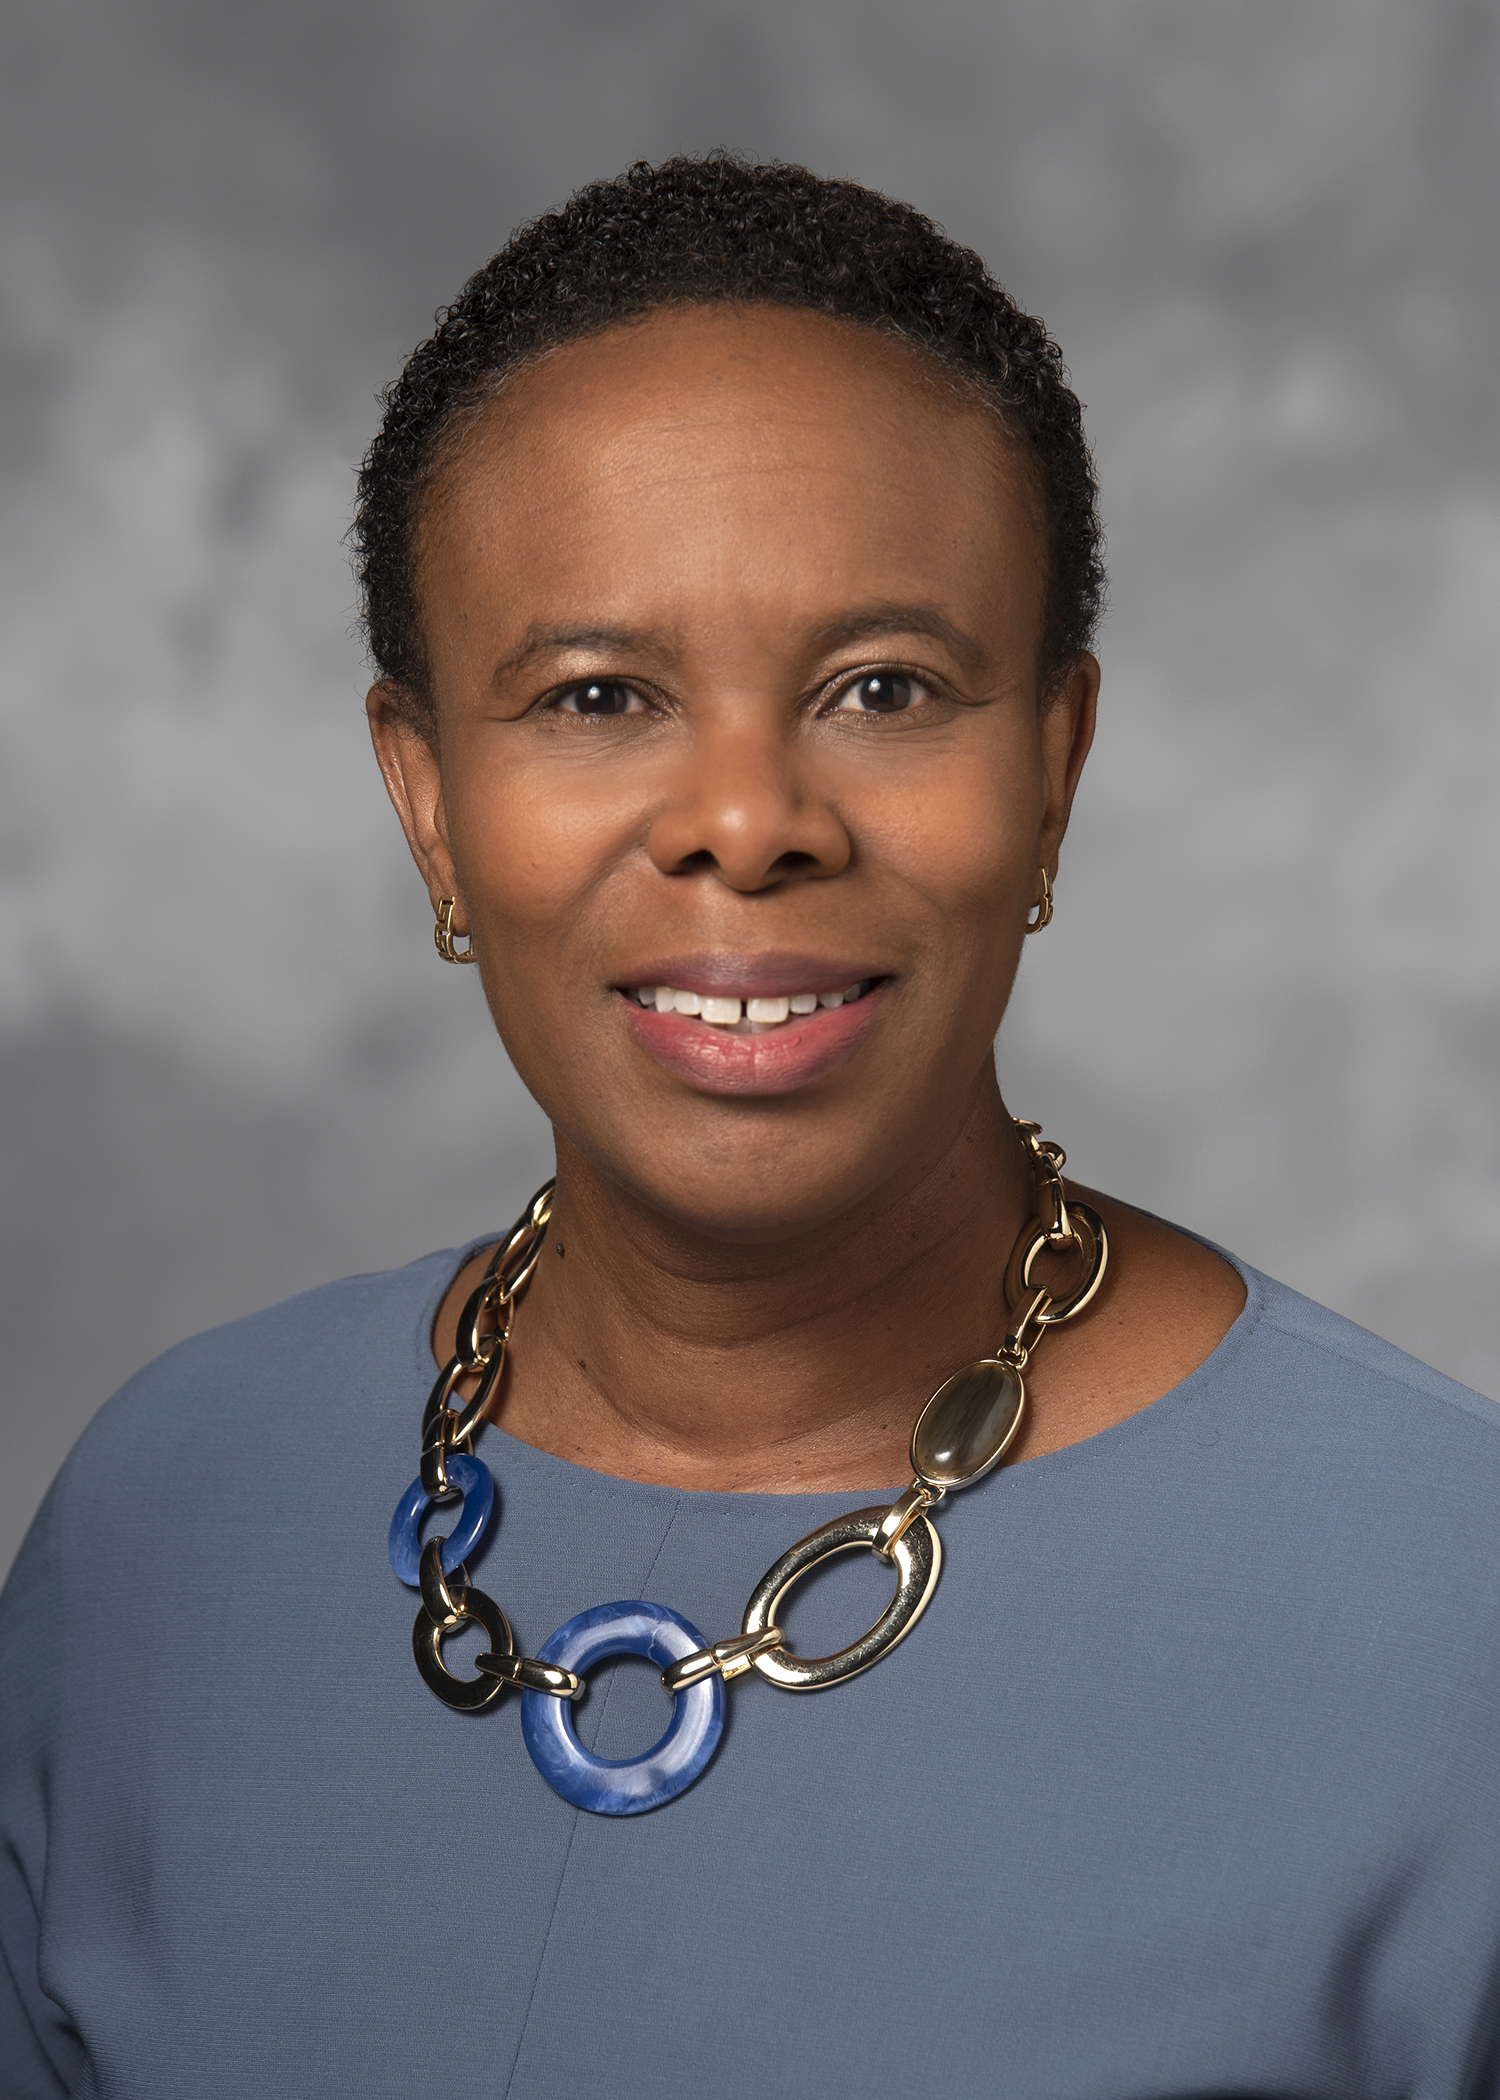 Health System Spotlight: Dr. Carladenise A. Edwards, EVP Chief Strategy Officer, Henry Ford Health System